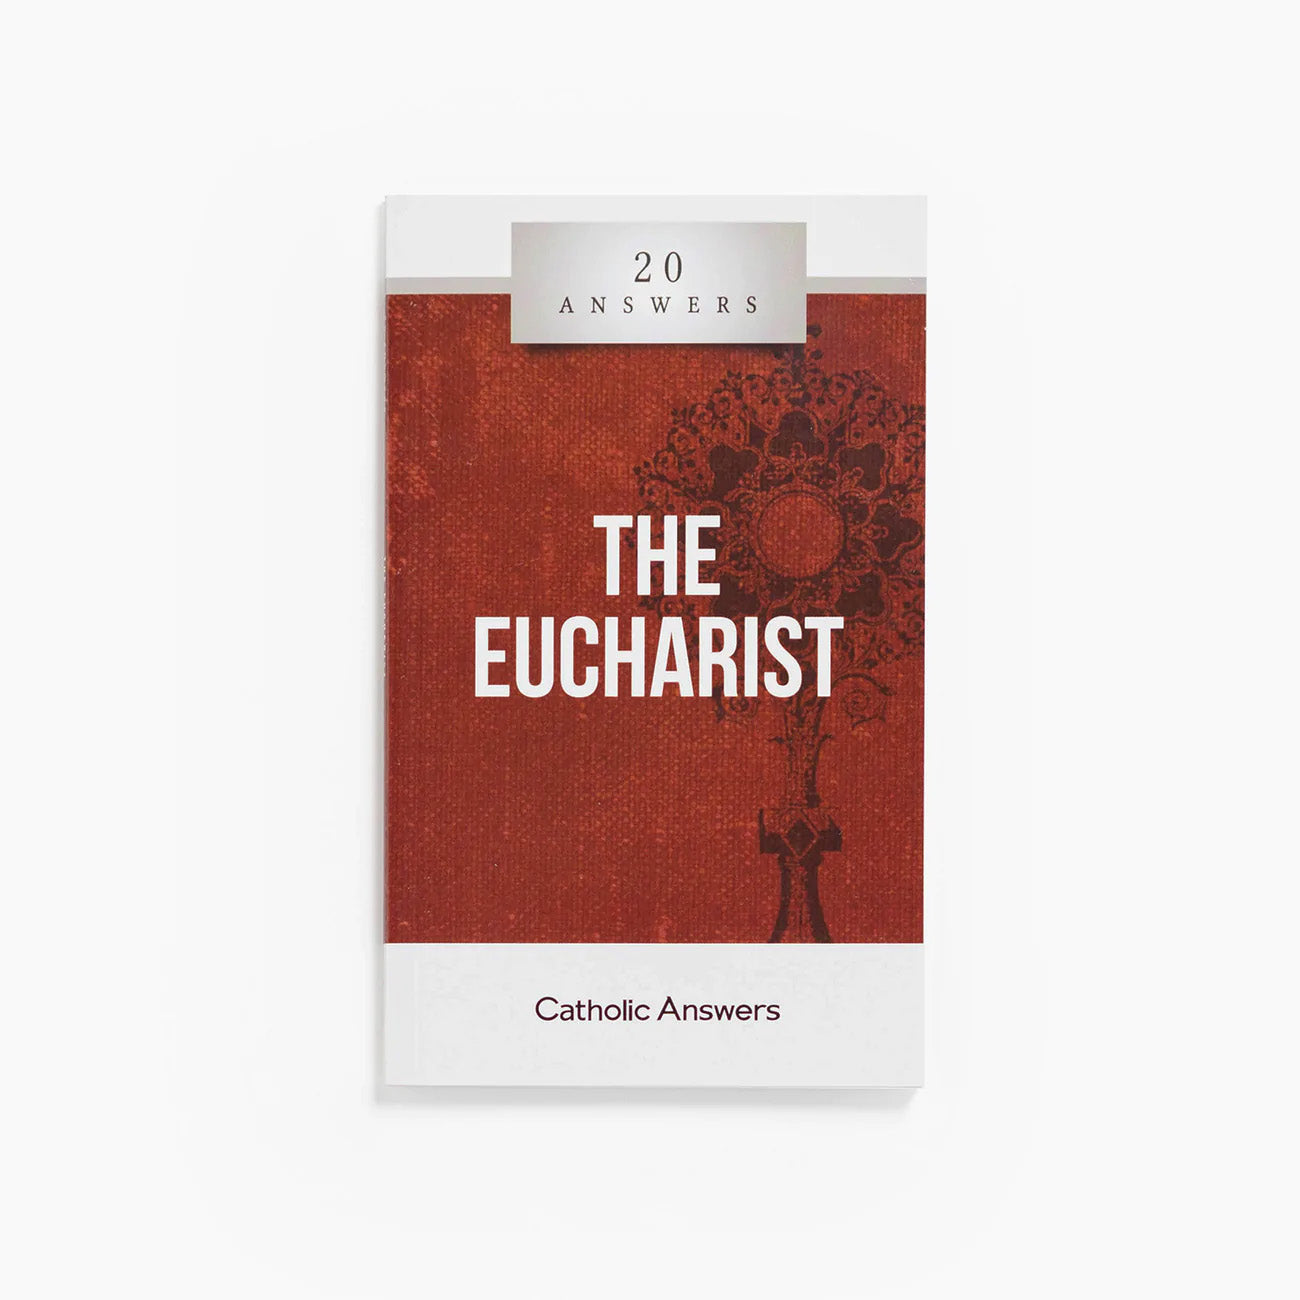 20 Answers - Eucharist (20 Answers Series from Catholic Answers)